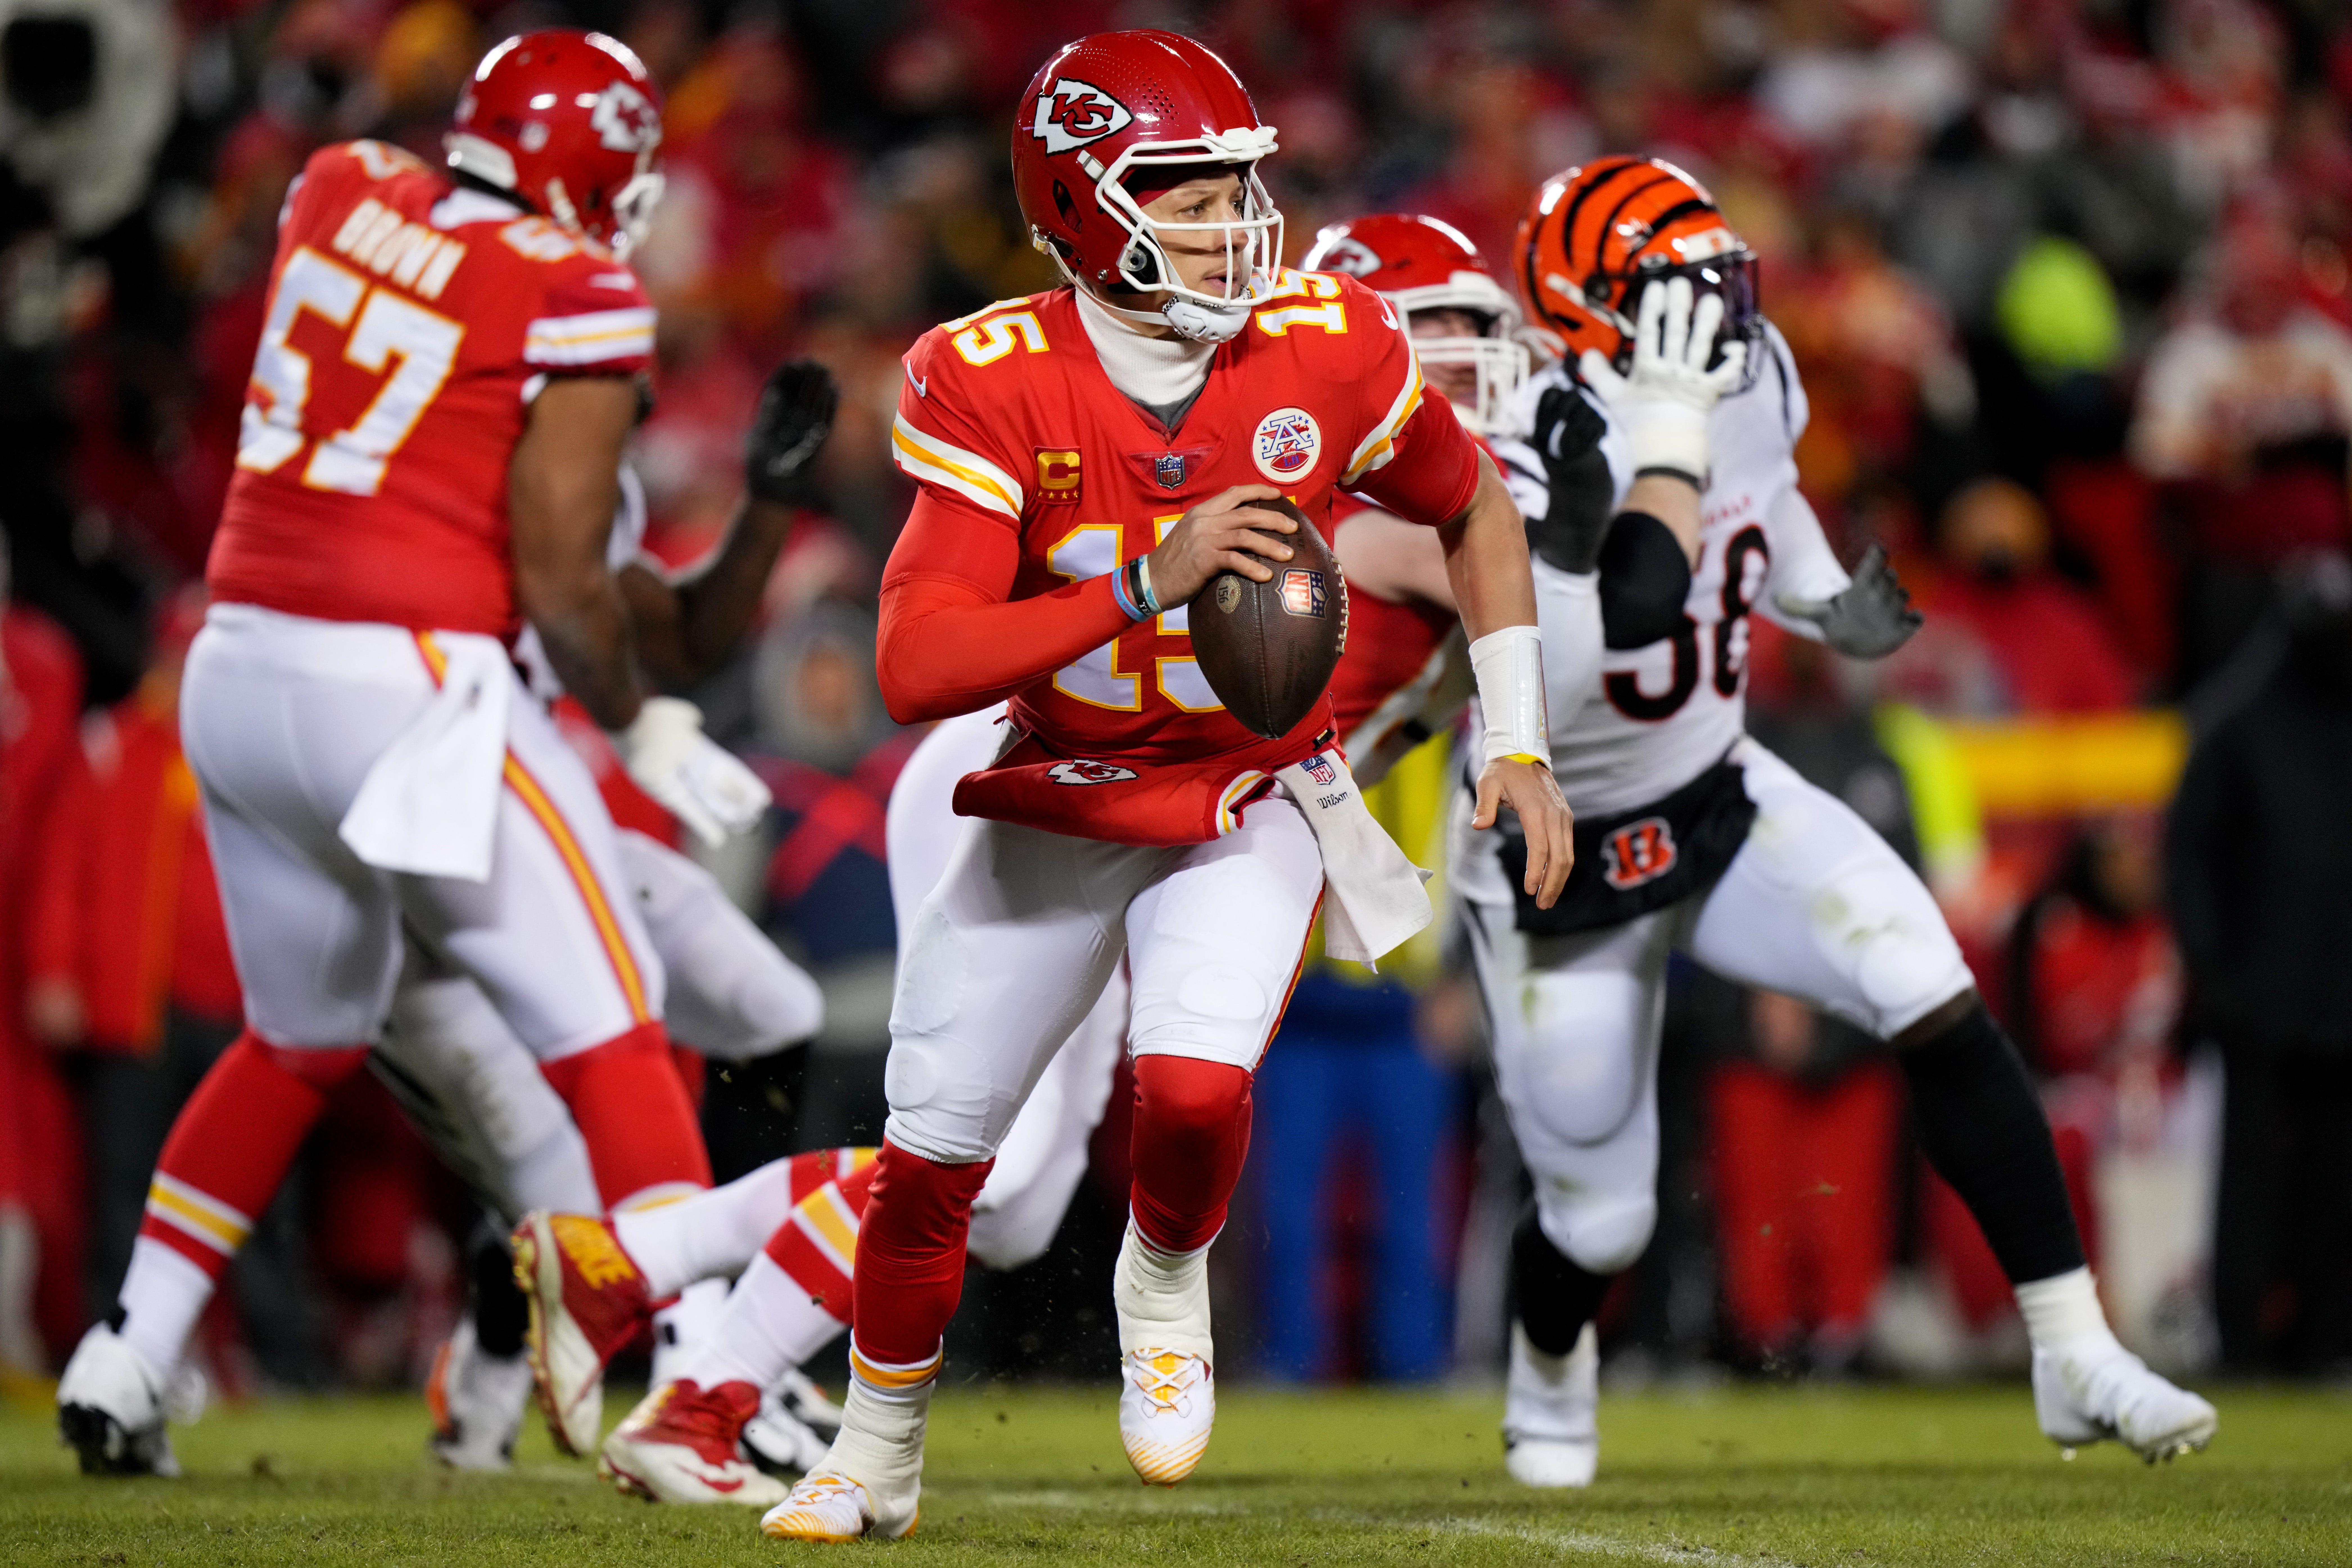 Patrick Mahomes’ career is nothing short of impressive